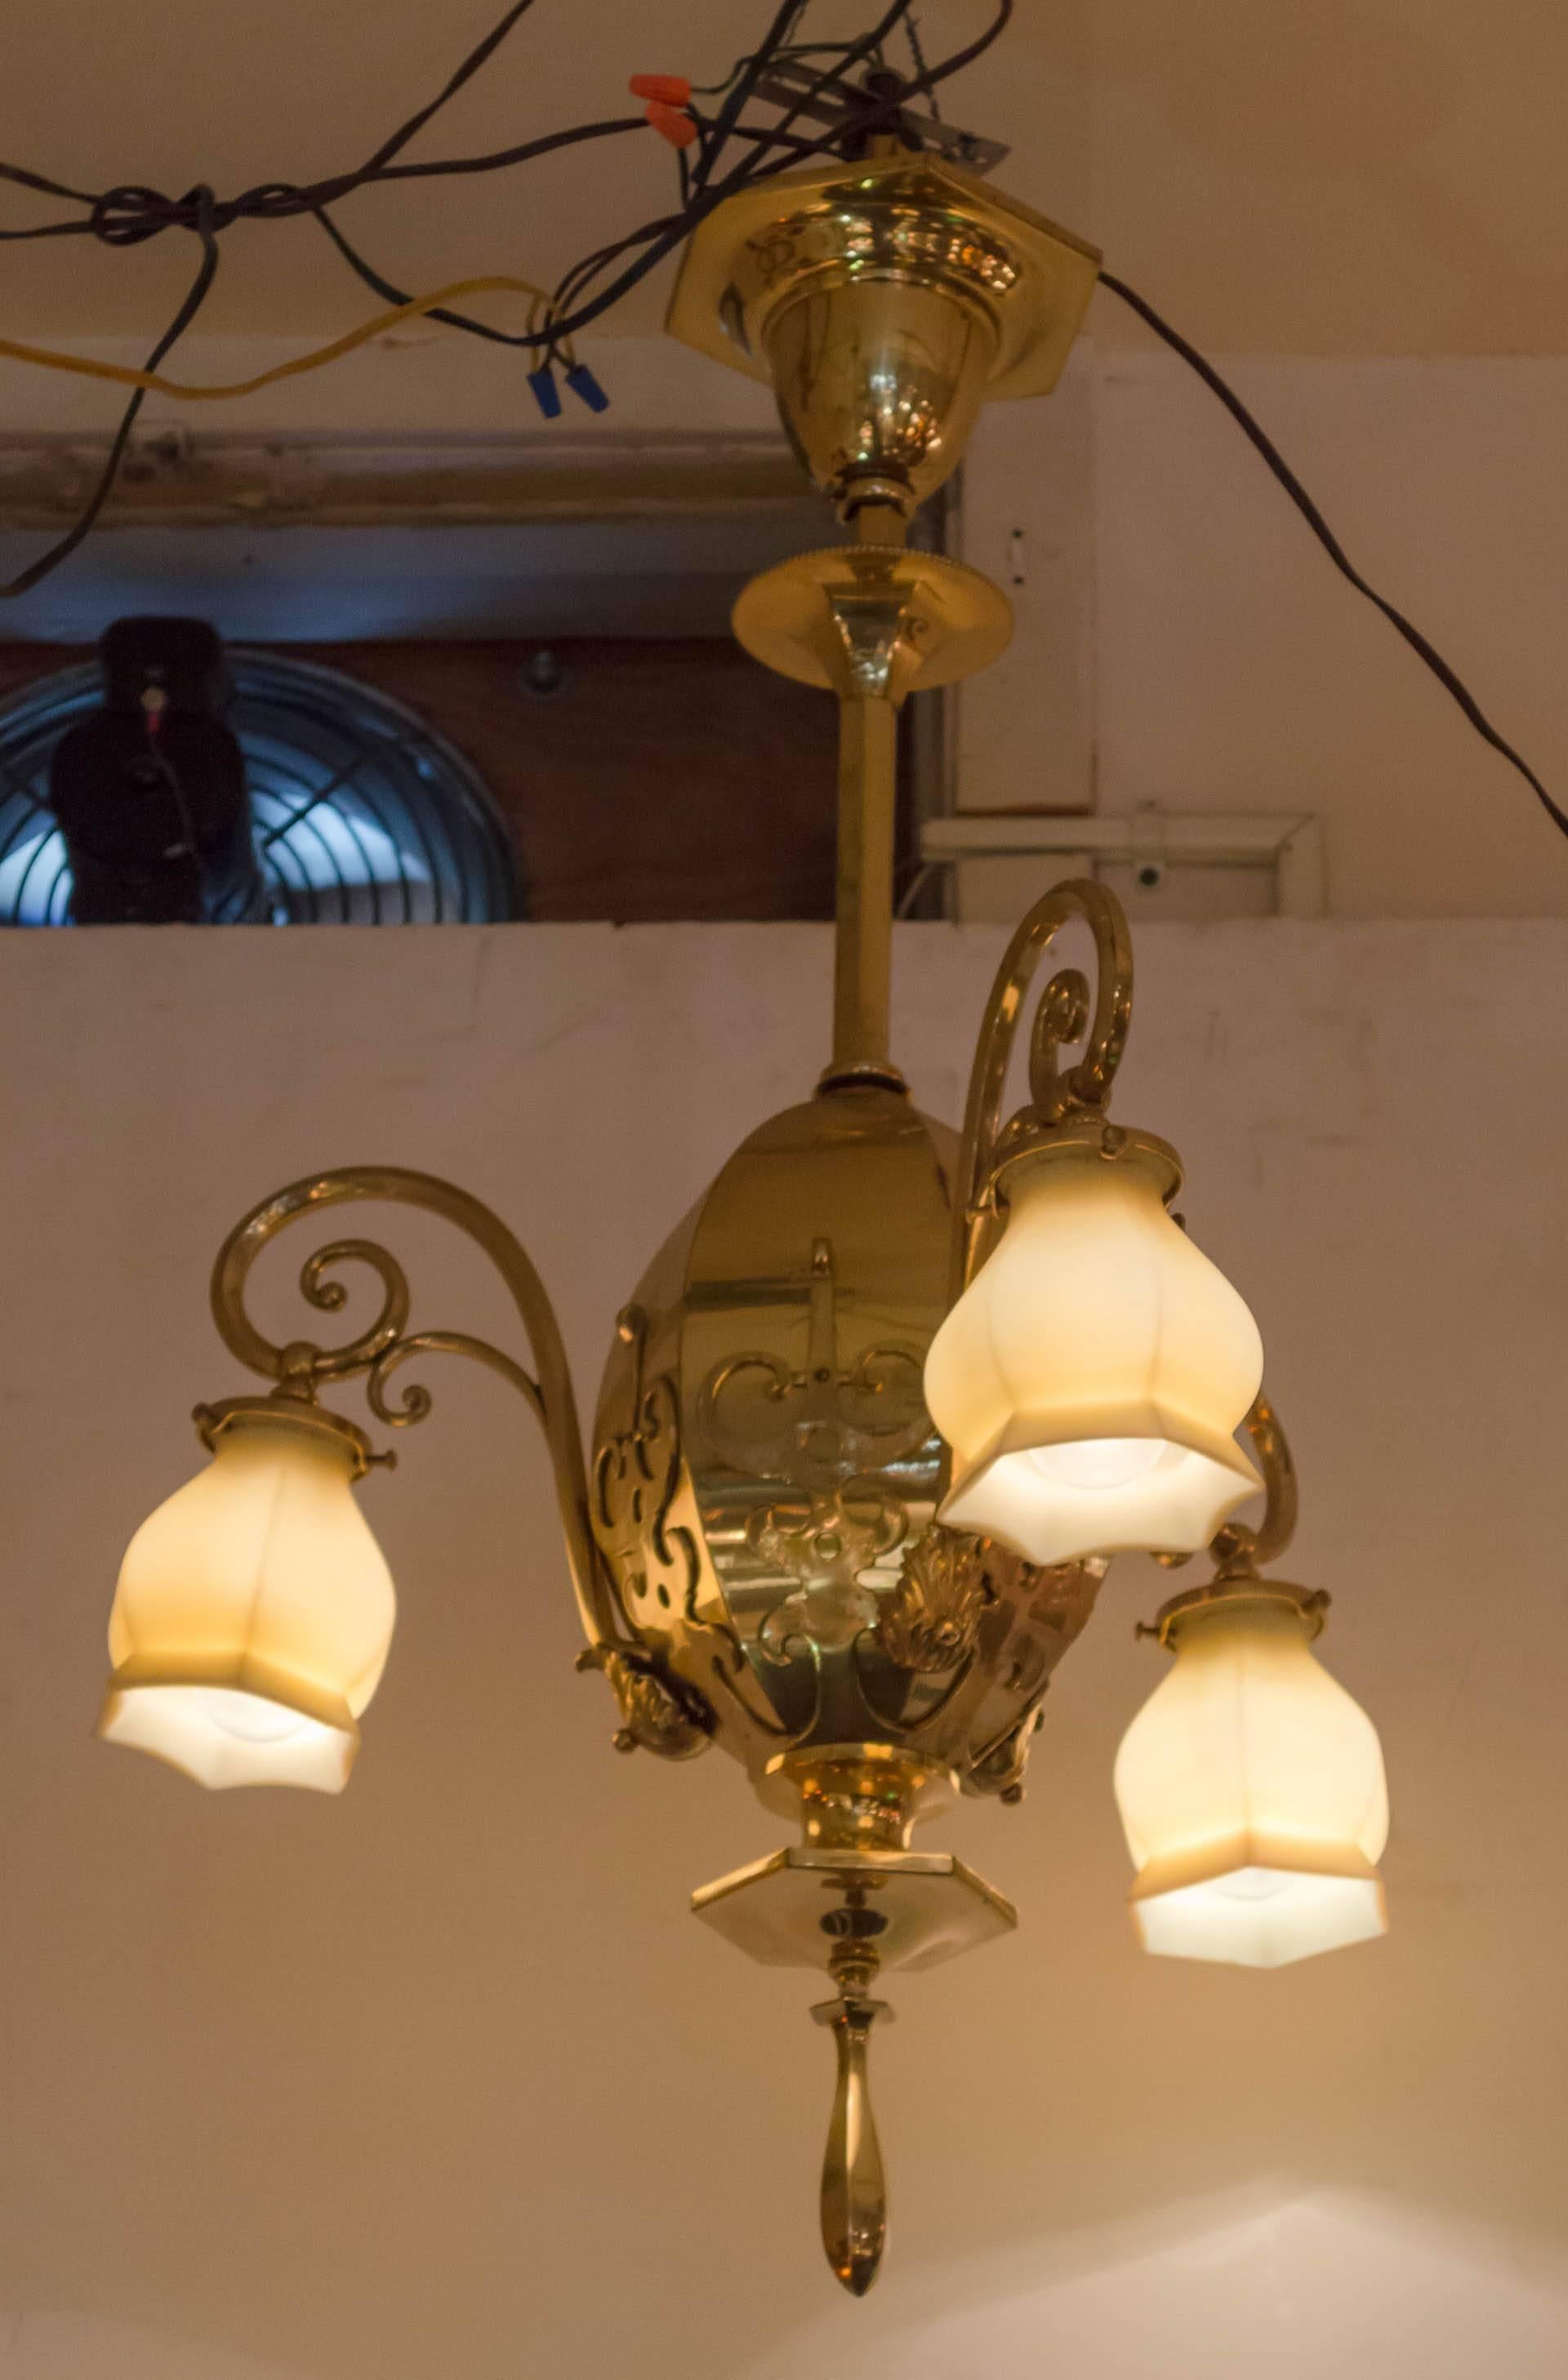 This very handsome chandelier is perfect for an entryway, or any other room in the home. The body is polished brass with unusual applied casting. The glass shades are some of our favorite options. Vaseline glass, or sometimes called custard glass